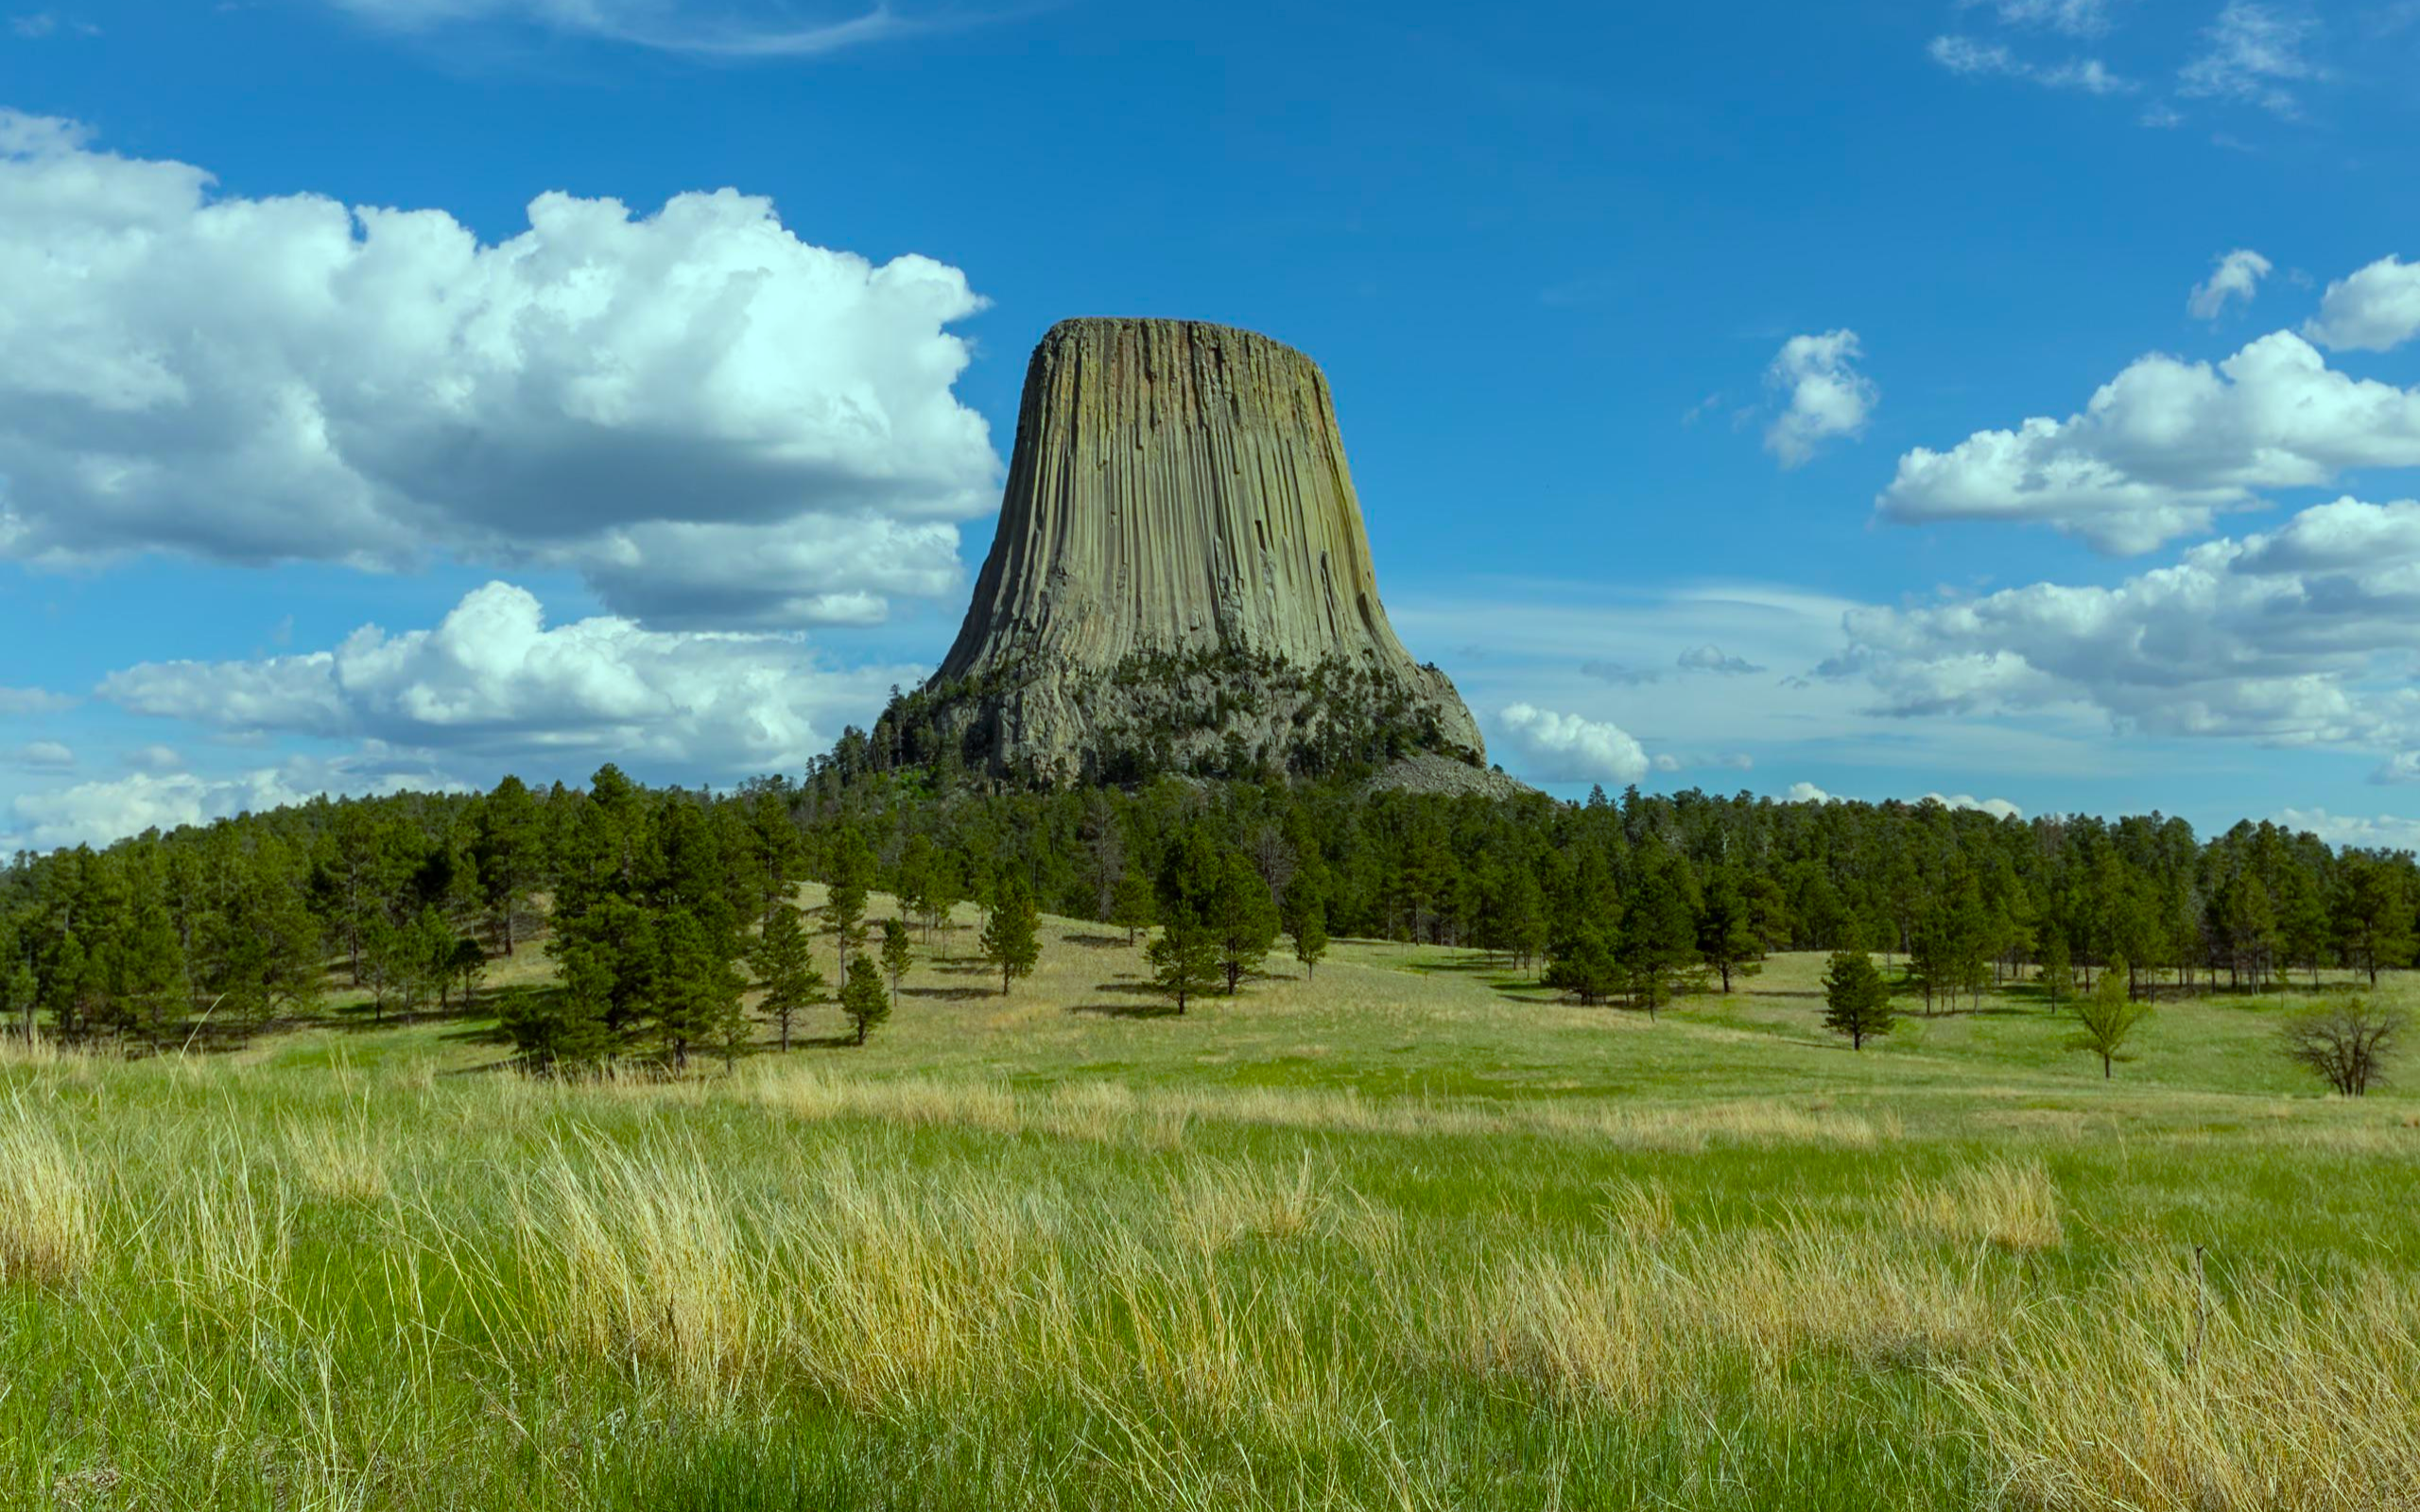 General 2560x1600 nature landscape grass trees field clouds sky rocks Devils Tower Wyoming USA